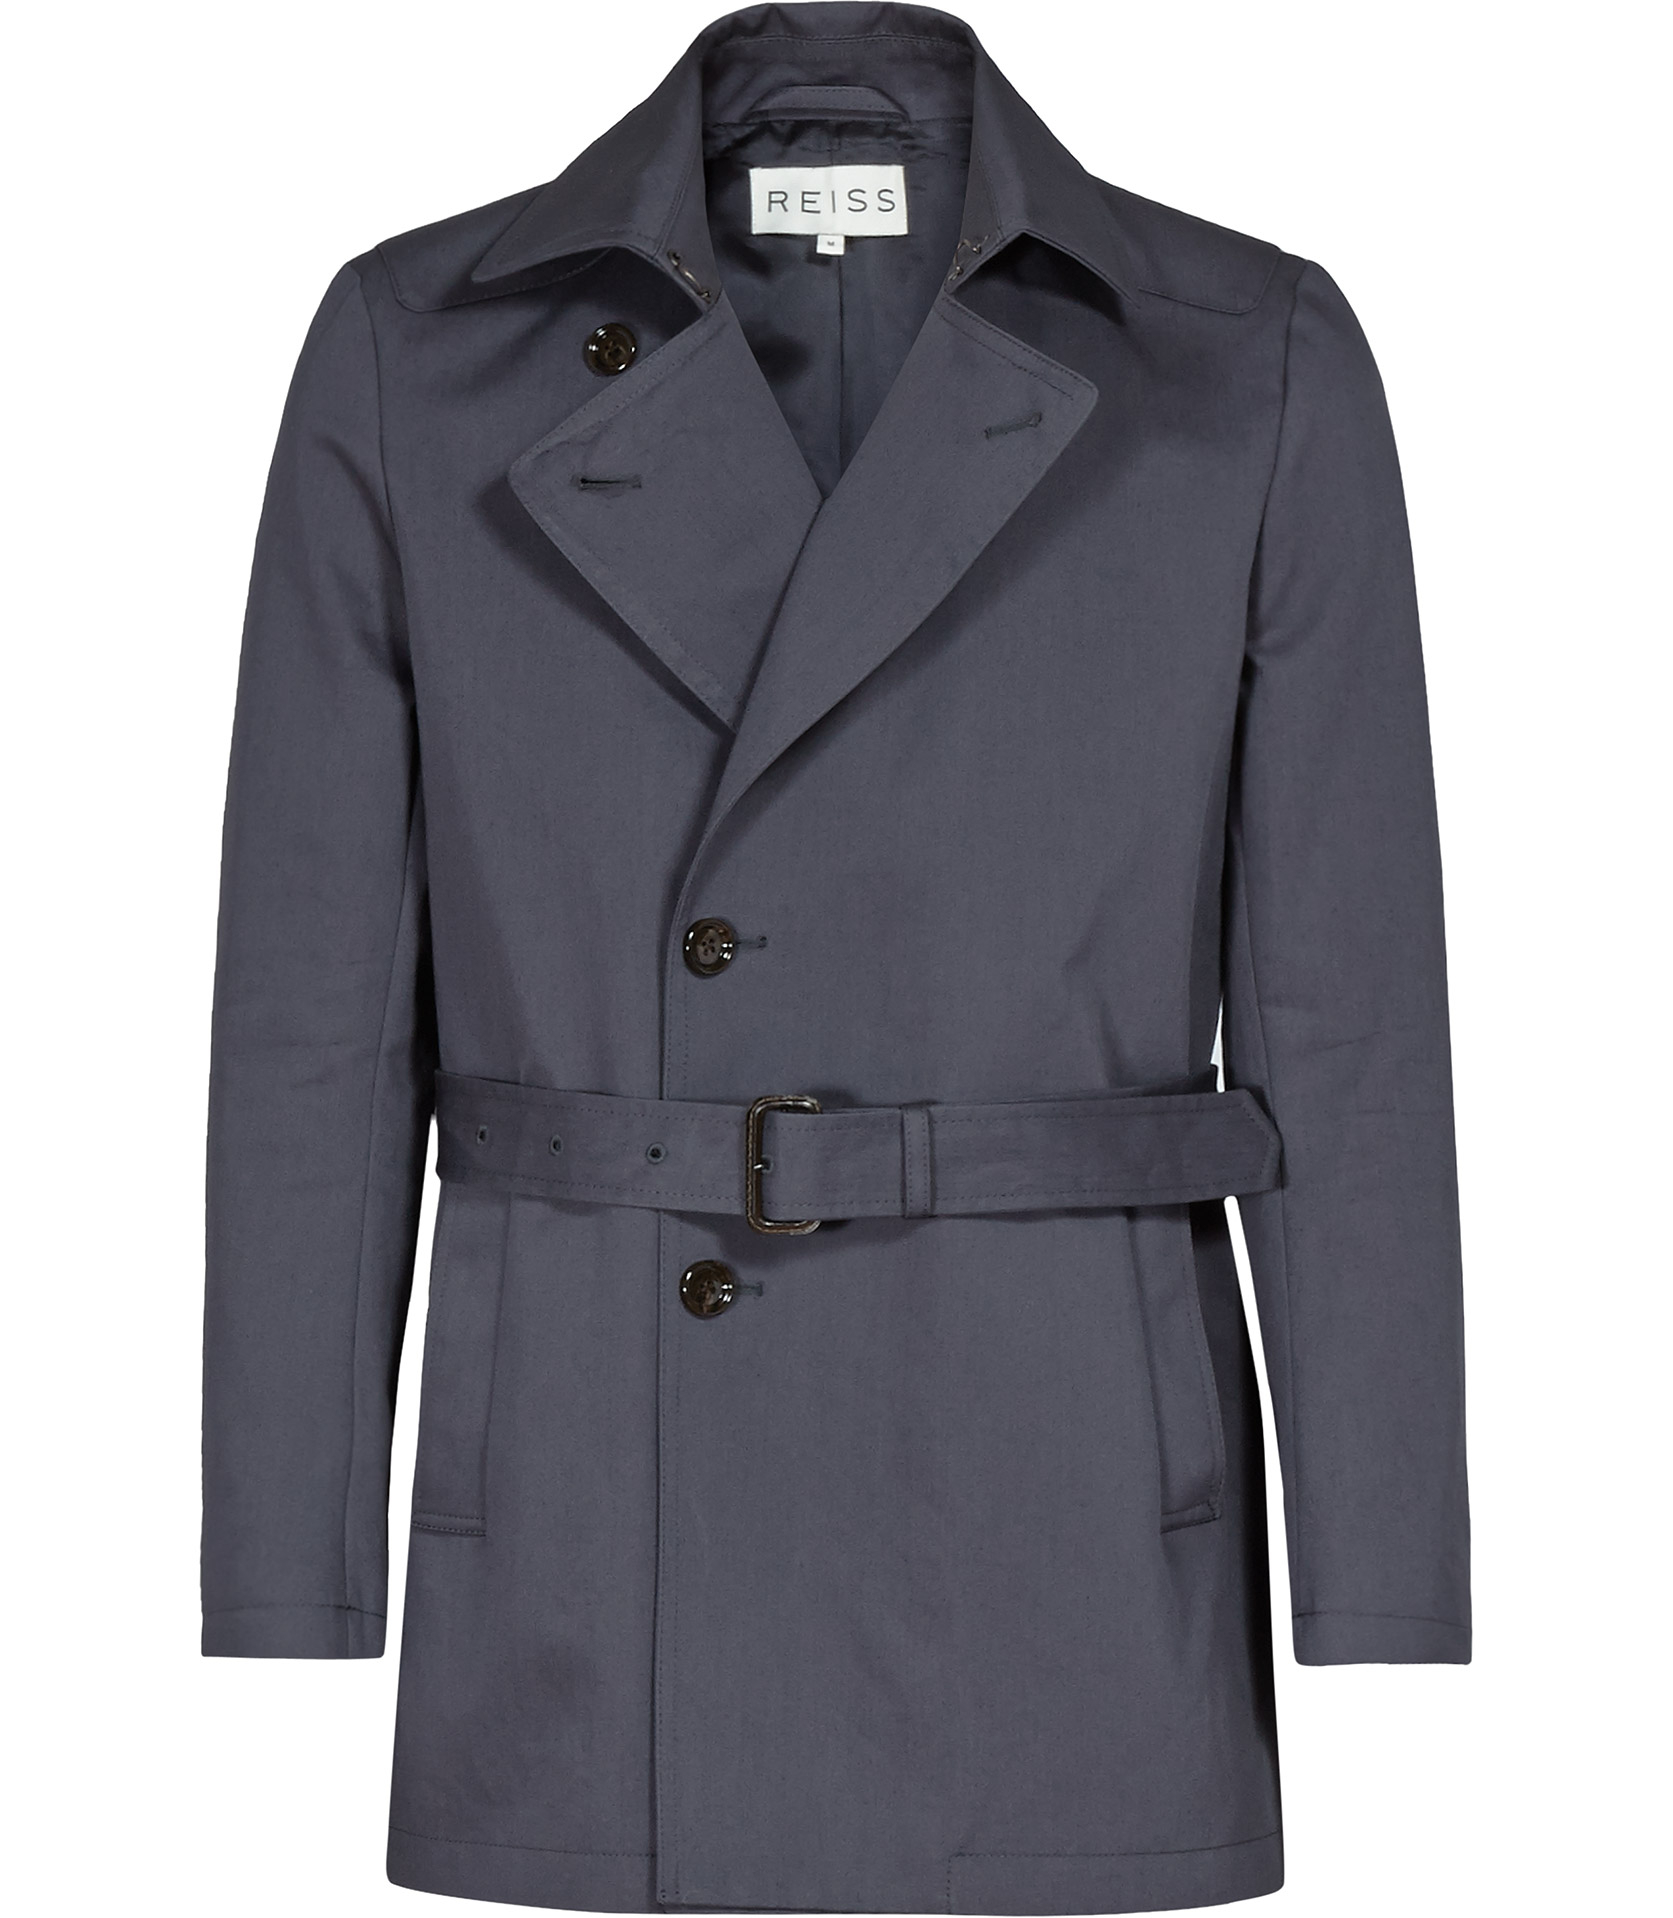 Reiss Sphere Belted Trench Coat in Blue for Men - Lyst